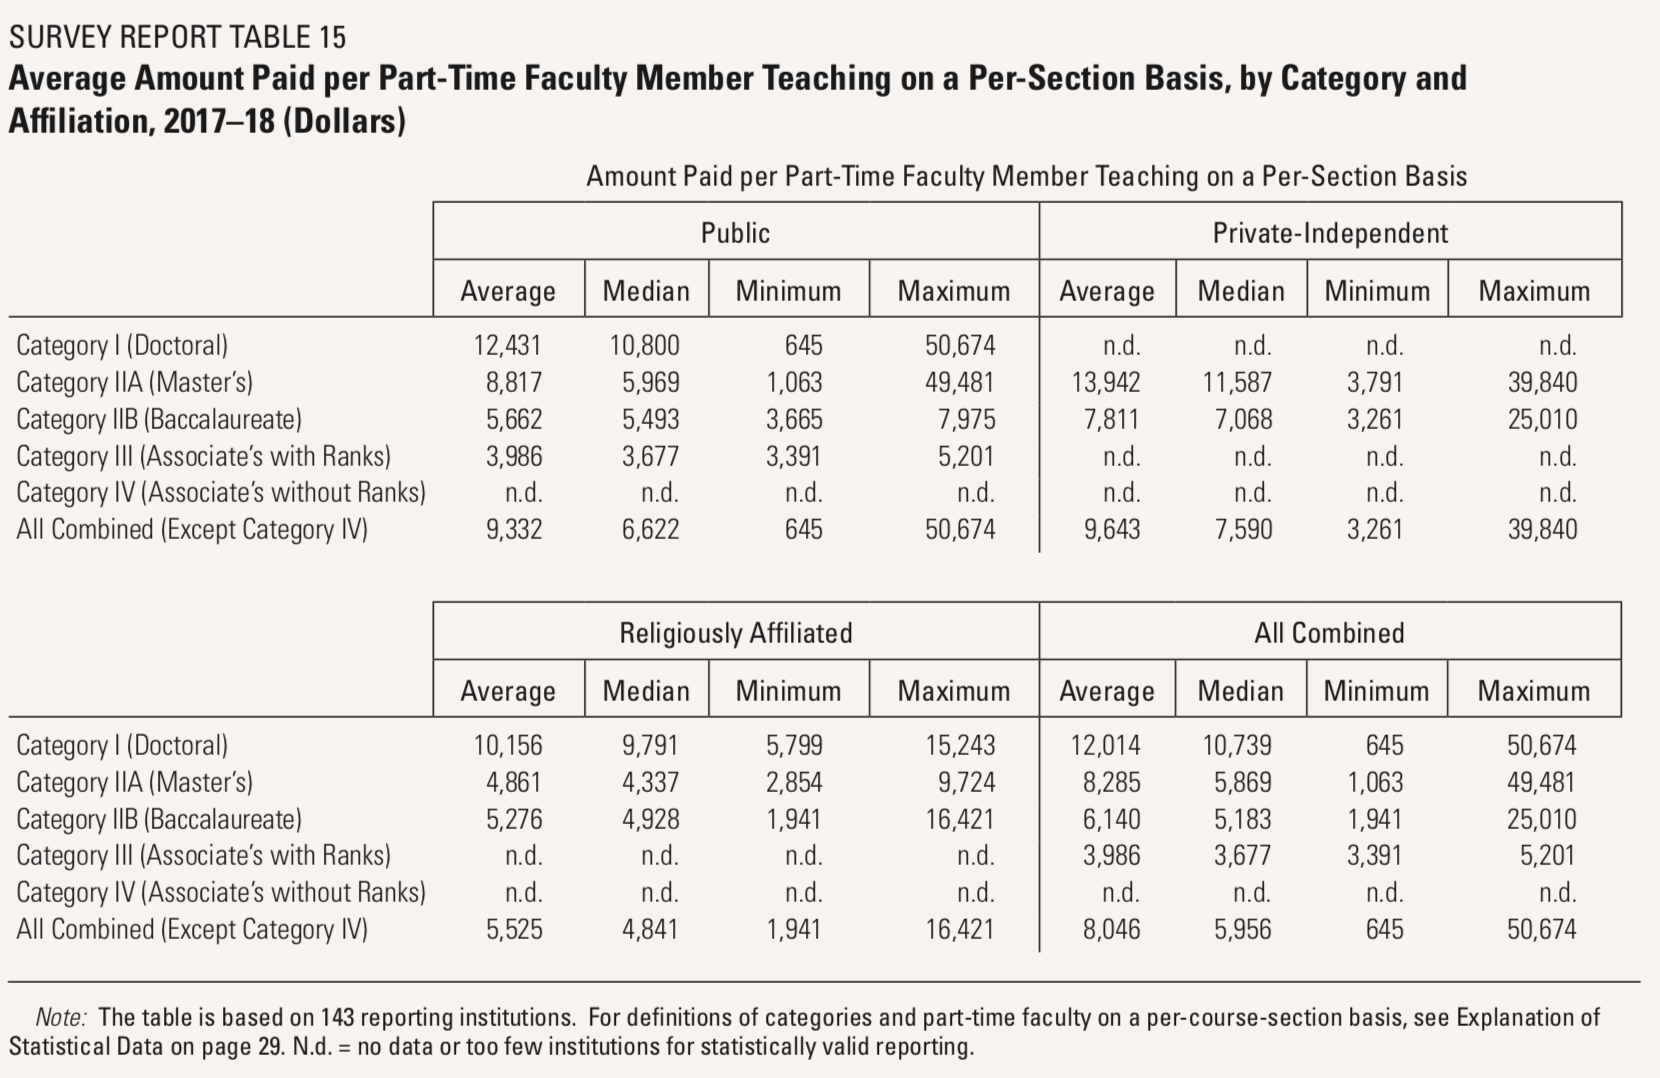 Survey Report Table 15: Average Amount Paid per Part-Time Faculty Member Teaching on a Per-Section Basis, by Category and Affiliation, 2017-18